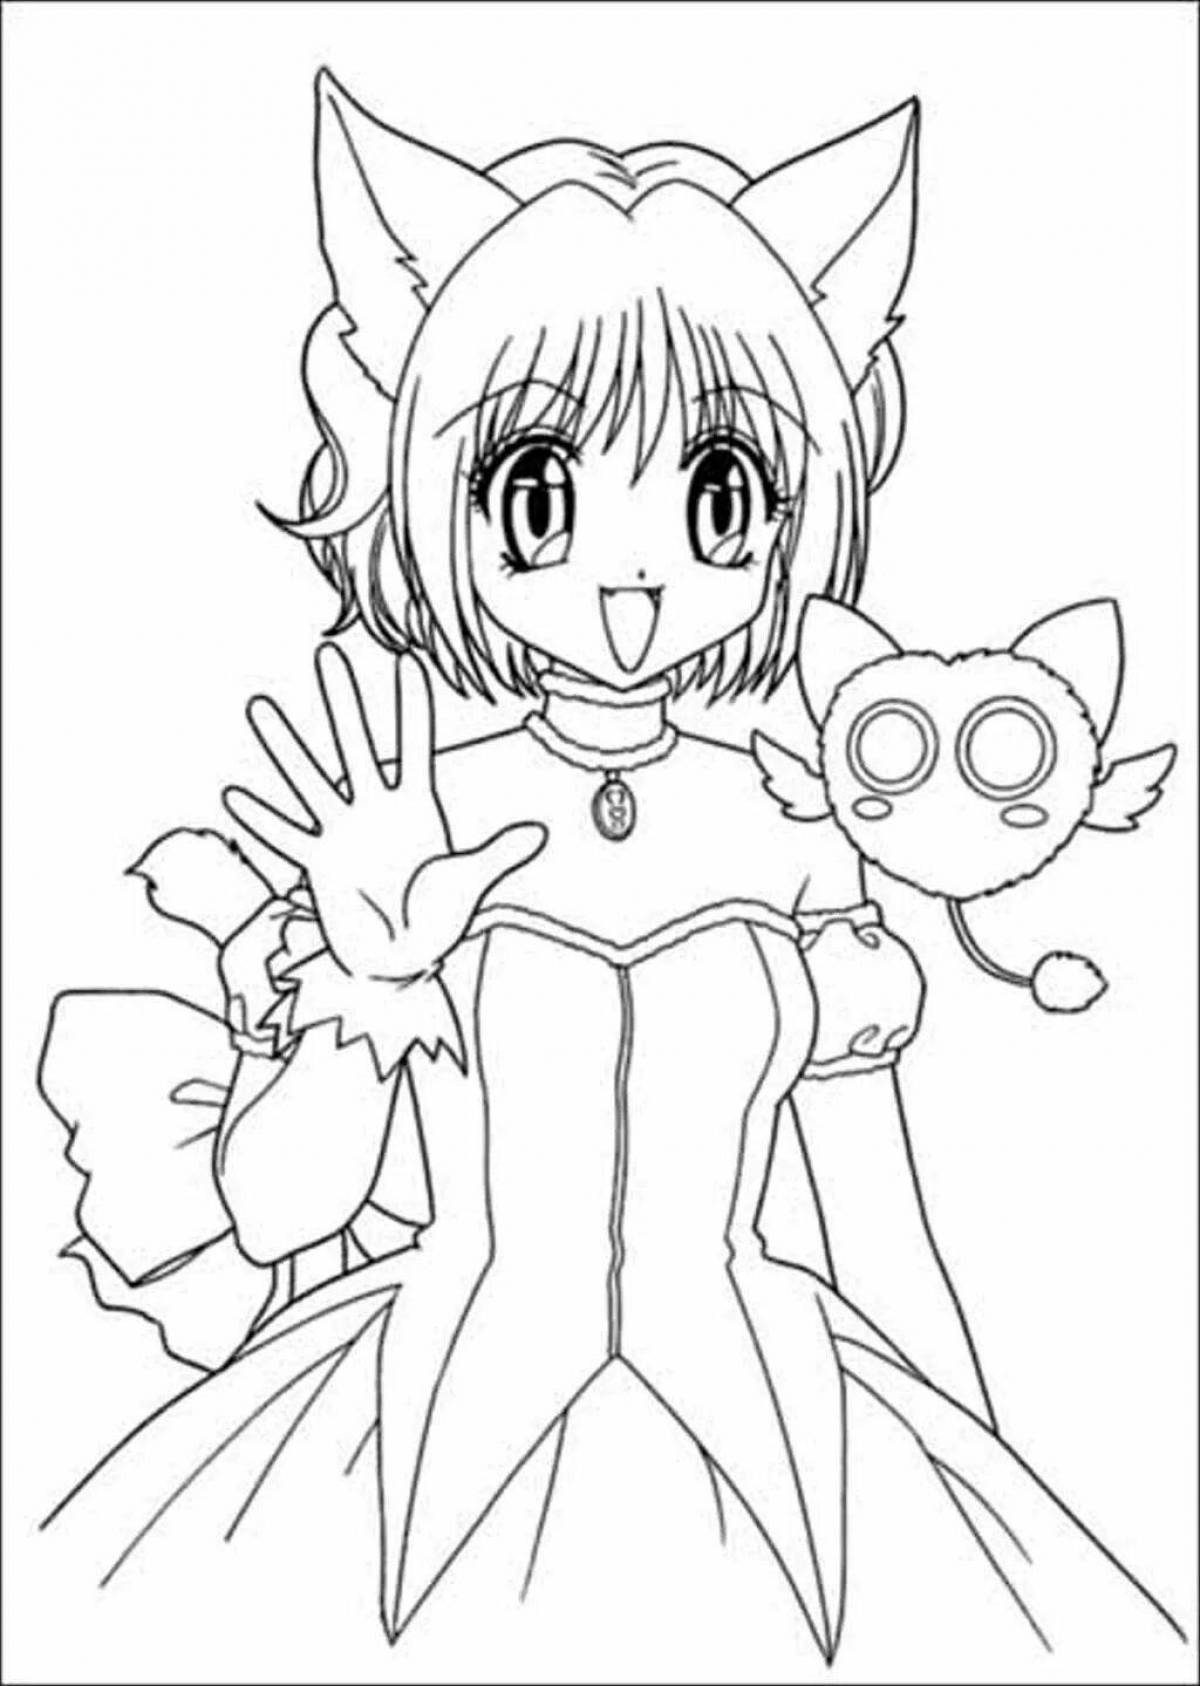 Bright anime coloring book for girls